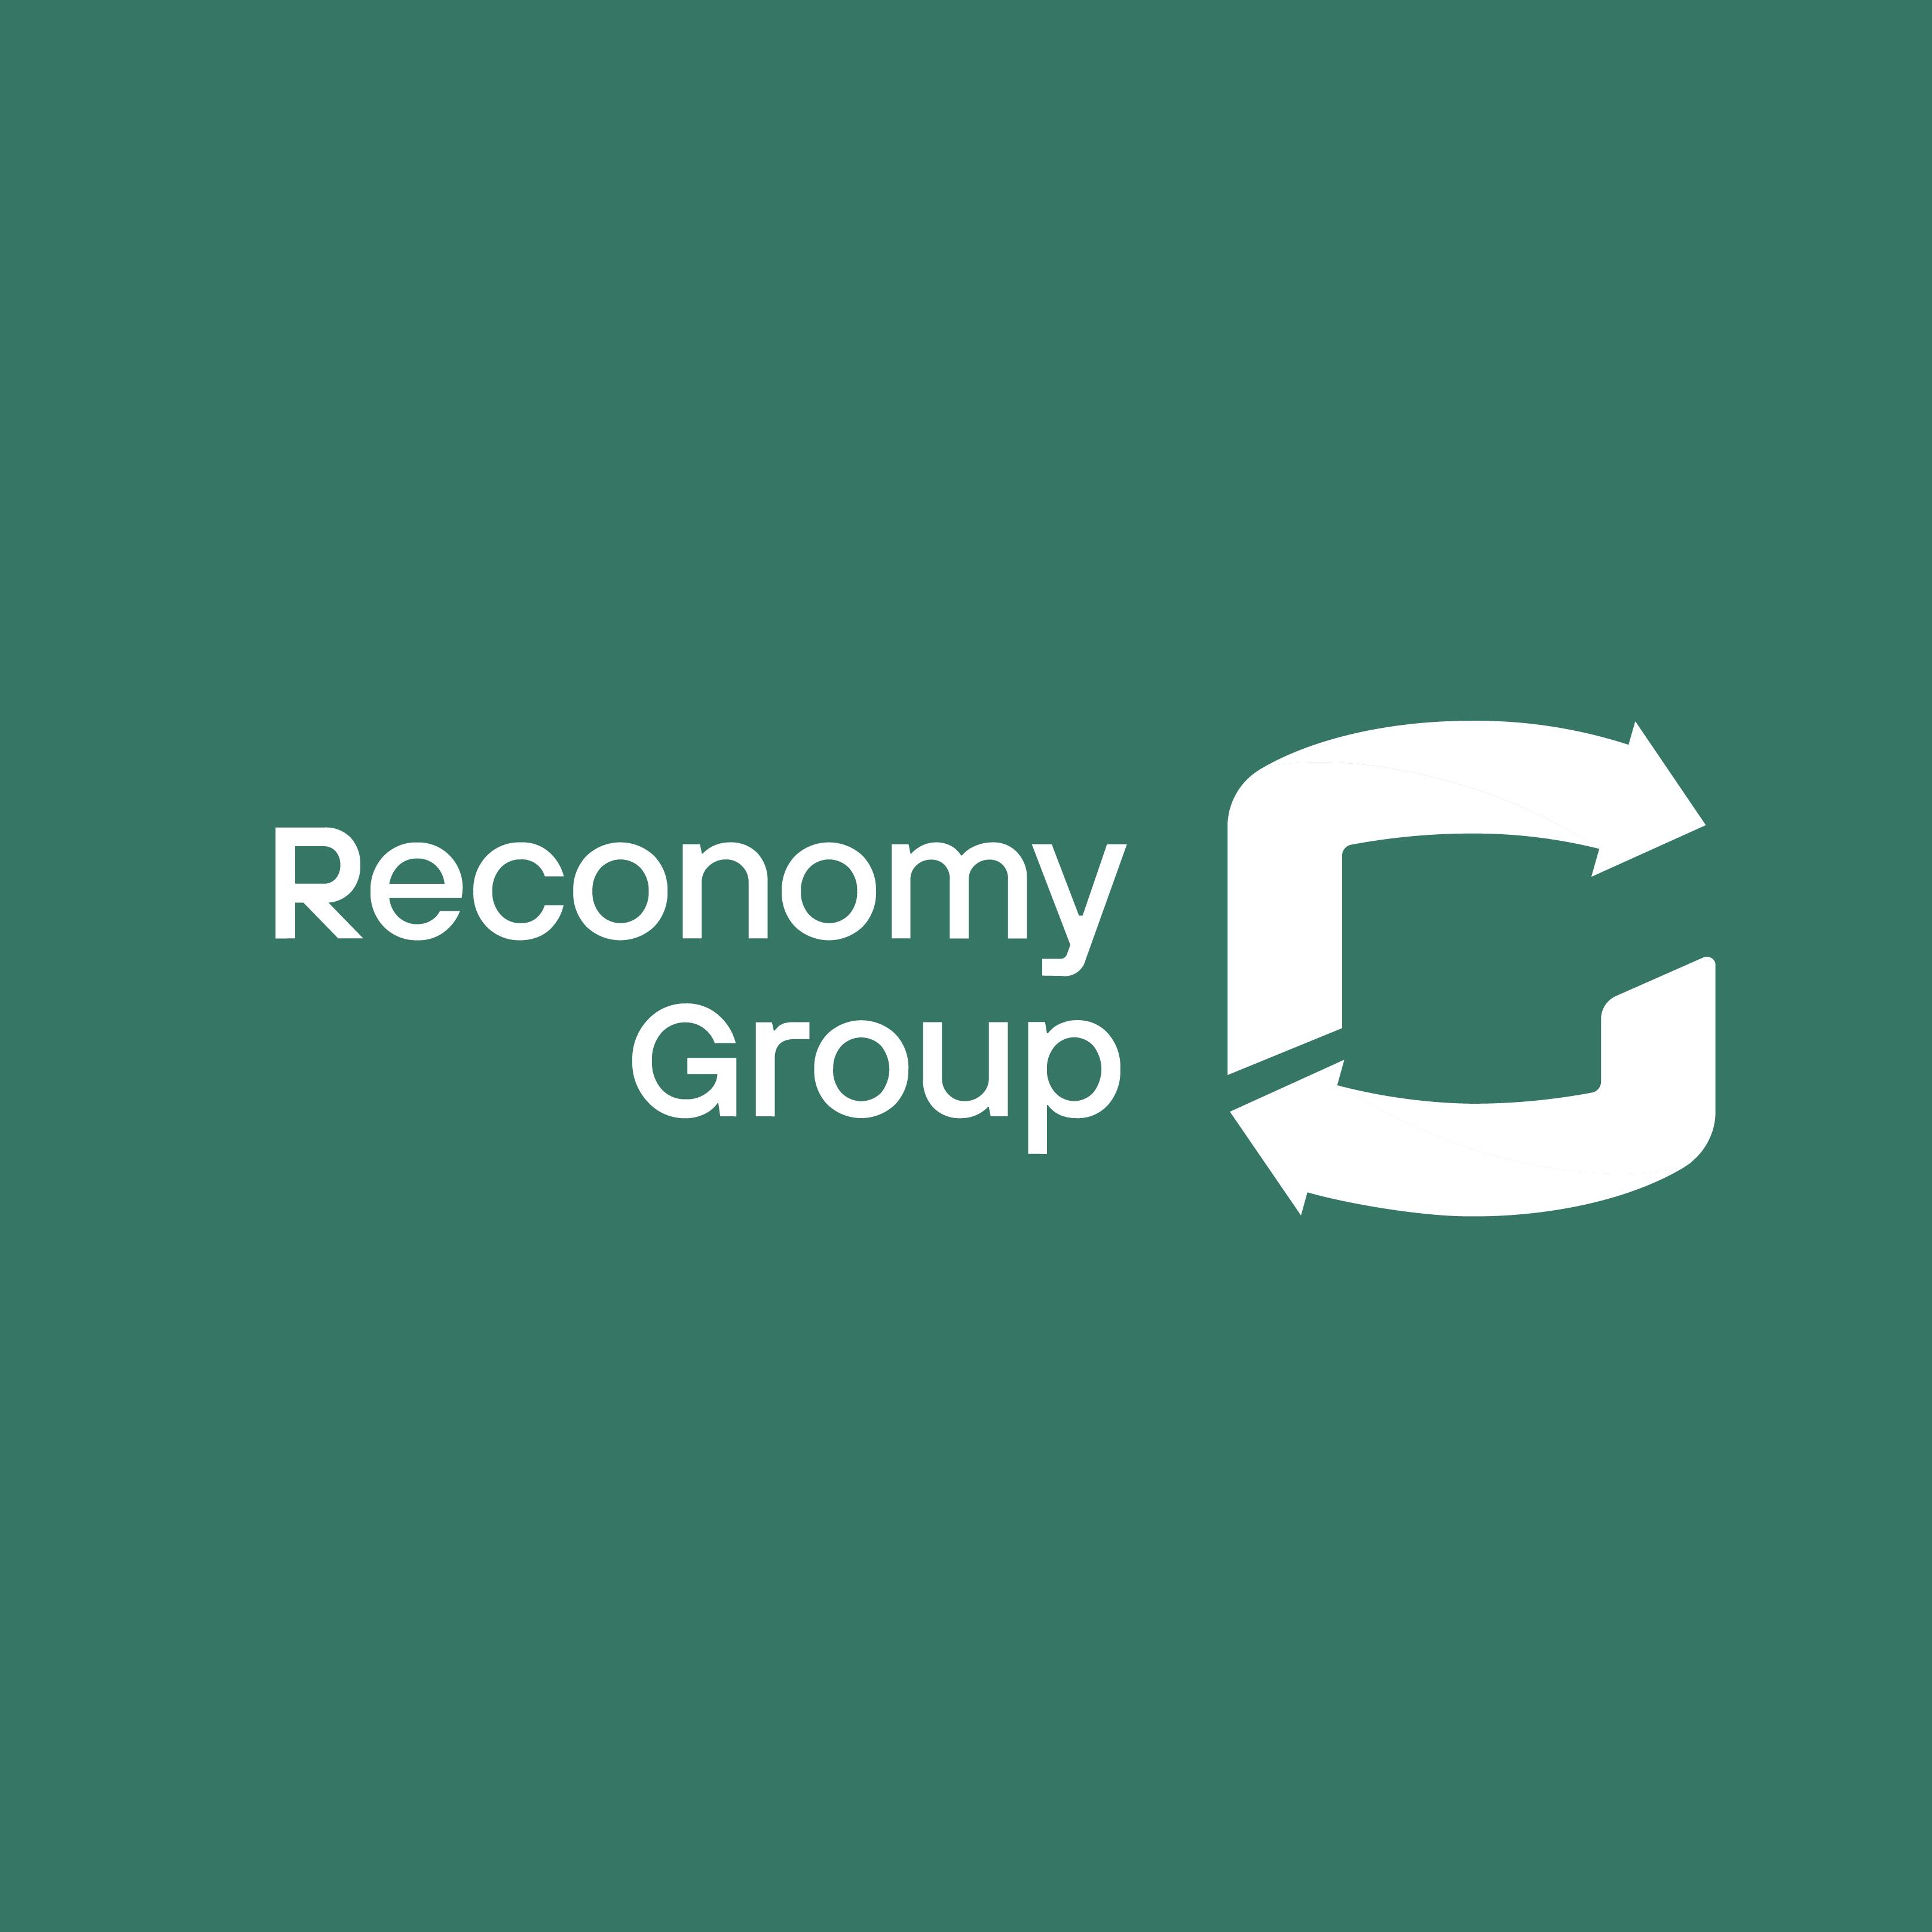 Product Reconomy Group acquires UK Waste Solutions Limited | AMA Waste image